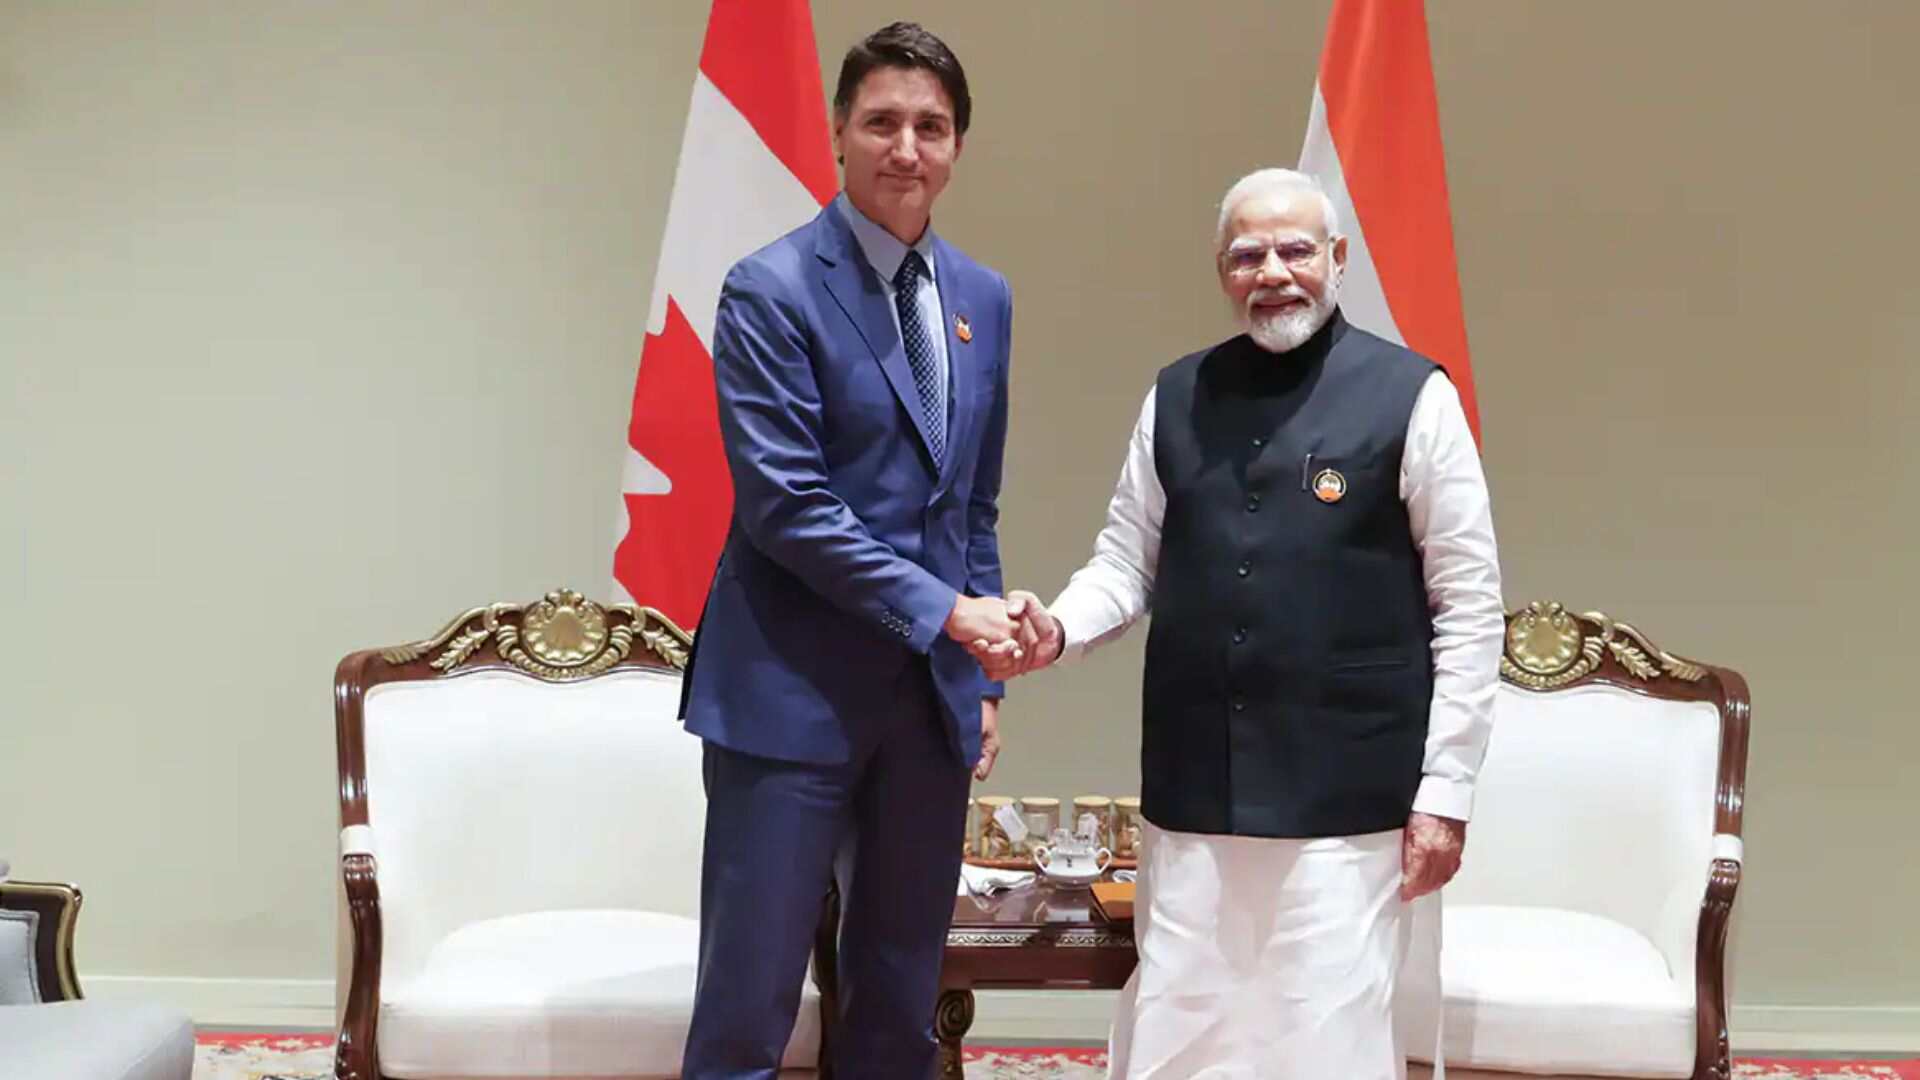 PM Modi To Meet Trudeau At G7 Summit: Expected To Discuss Separatist Issue